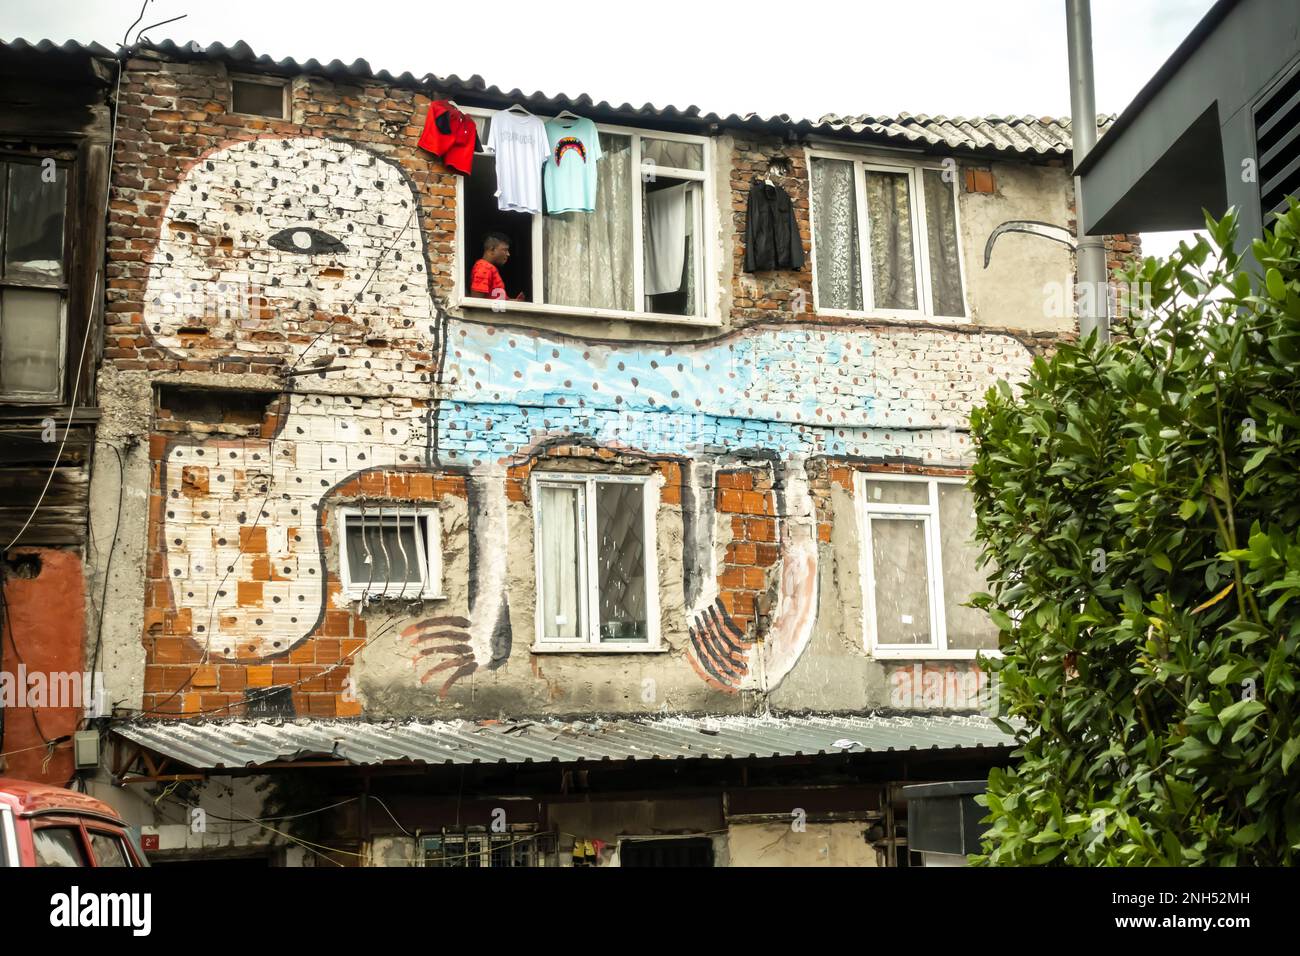 Tiled mural depicting a creature with claws in a neighborhood of Dolapdere Beyoğlu Istanbul Turkey Stock Photo